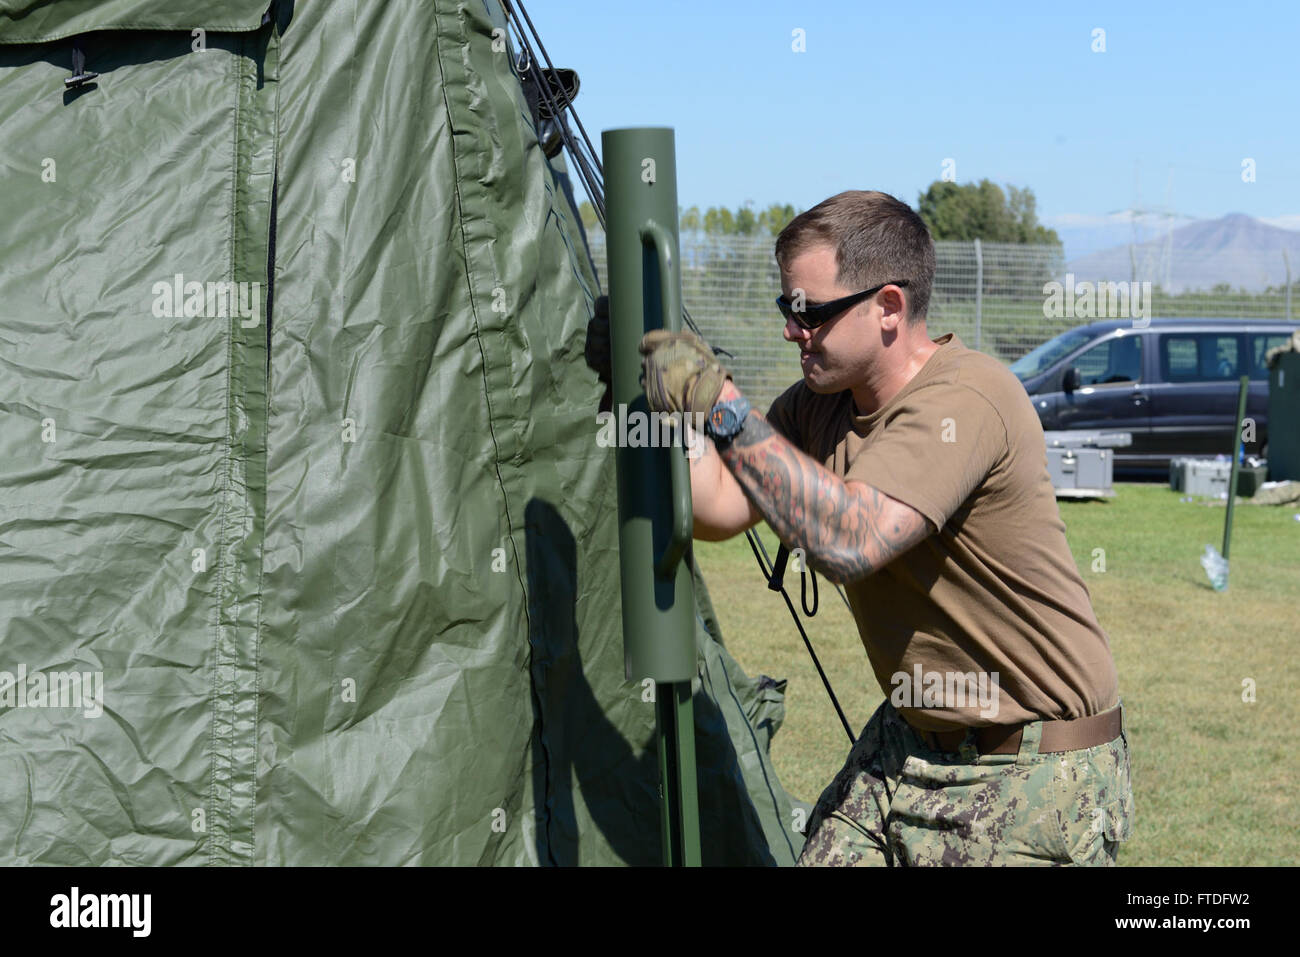 150921-N-UE250-036 GRICIGNANO, Italy (Sept. 21, 2015) Construction Electrician 1st Class Damon Gleason, assigned to Commander, Naval Forces Europe Det. Maritime Ashore Support Team (MAST), uses a post driver to secure a post for the set-up of a c-wire fence around a mobile command center on U.S. Naval Support Activity Naples, Italy Sept. 21, 2015. MAST is currently conducting a Continuity of Operations Planning and crisis management field training exercise. (U.S. Navy photo by Mass Communication Specialist 2nd Class Corey Hensley/Released) Stock Photo